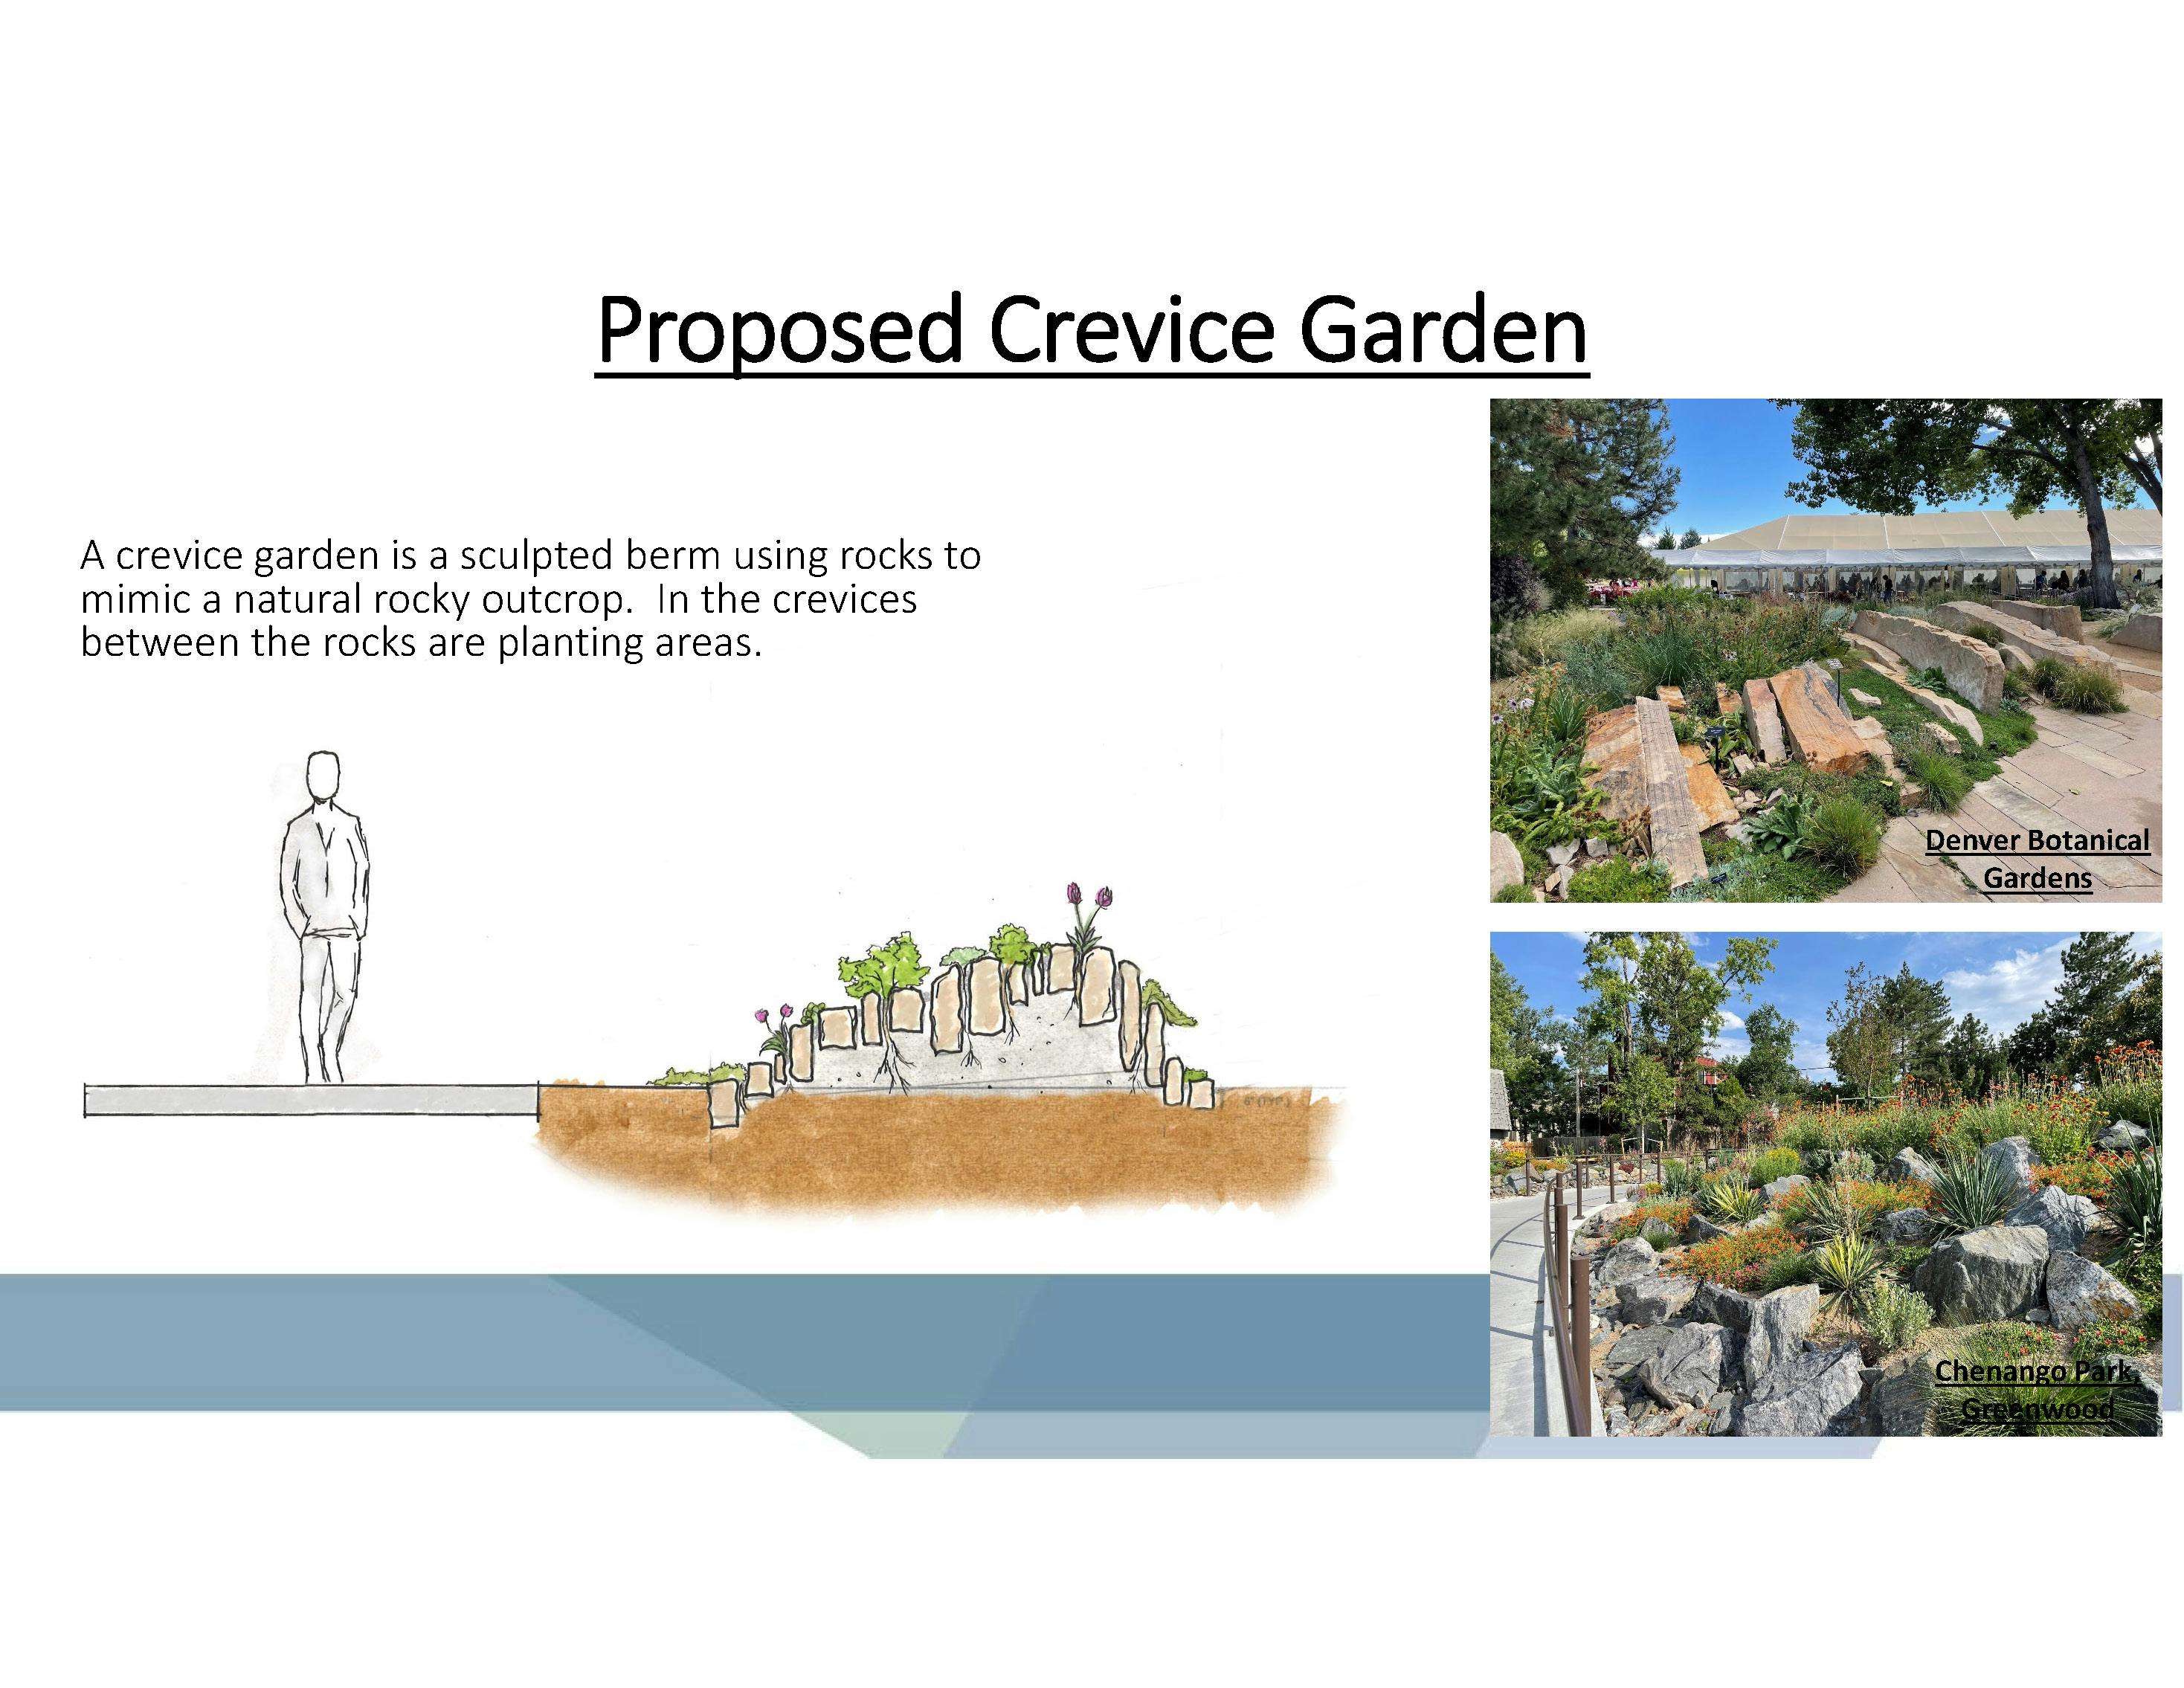 Proposed Crevice Garden